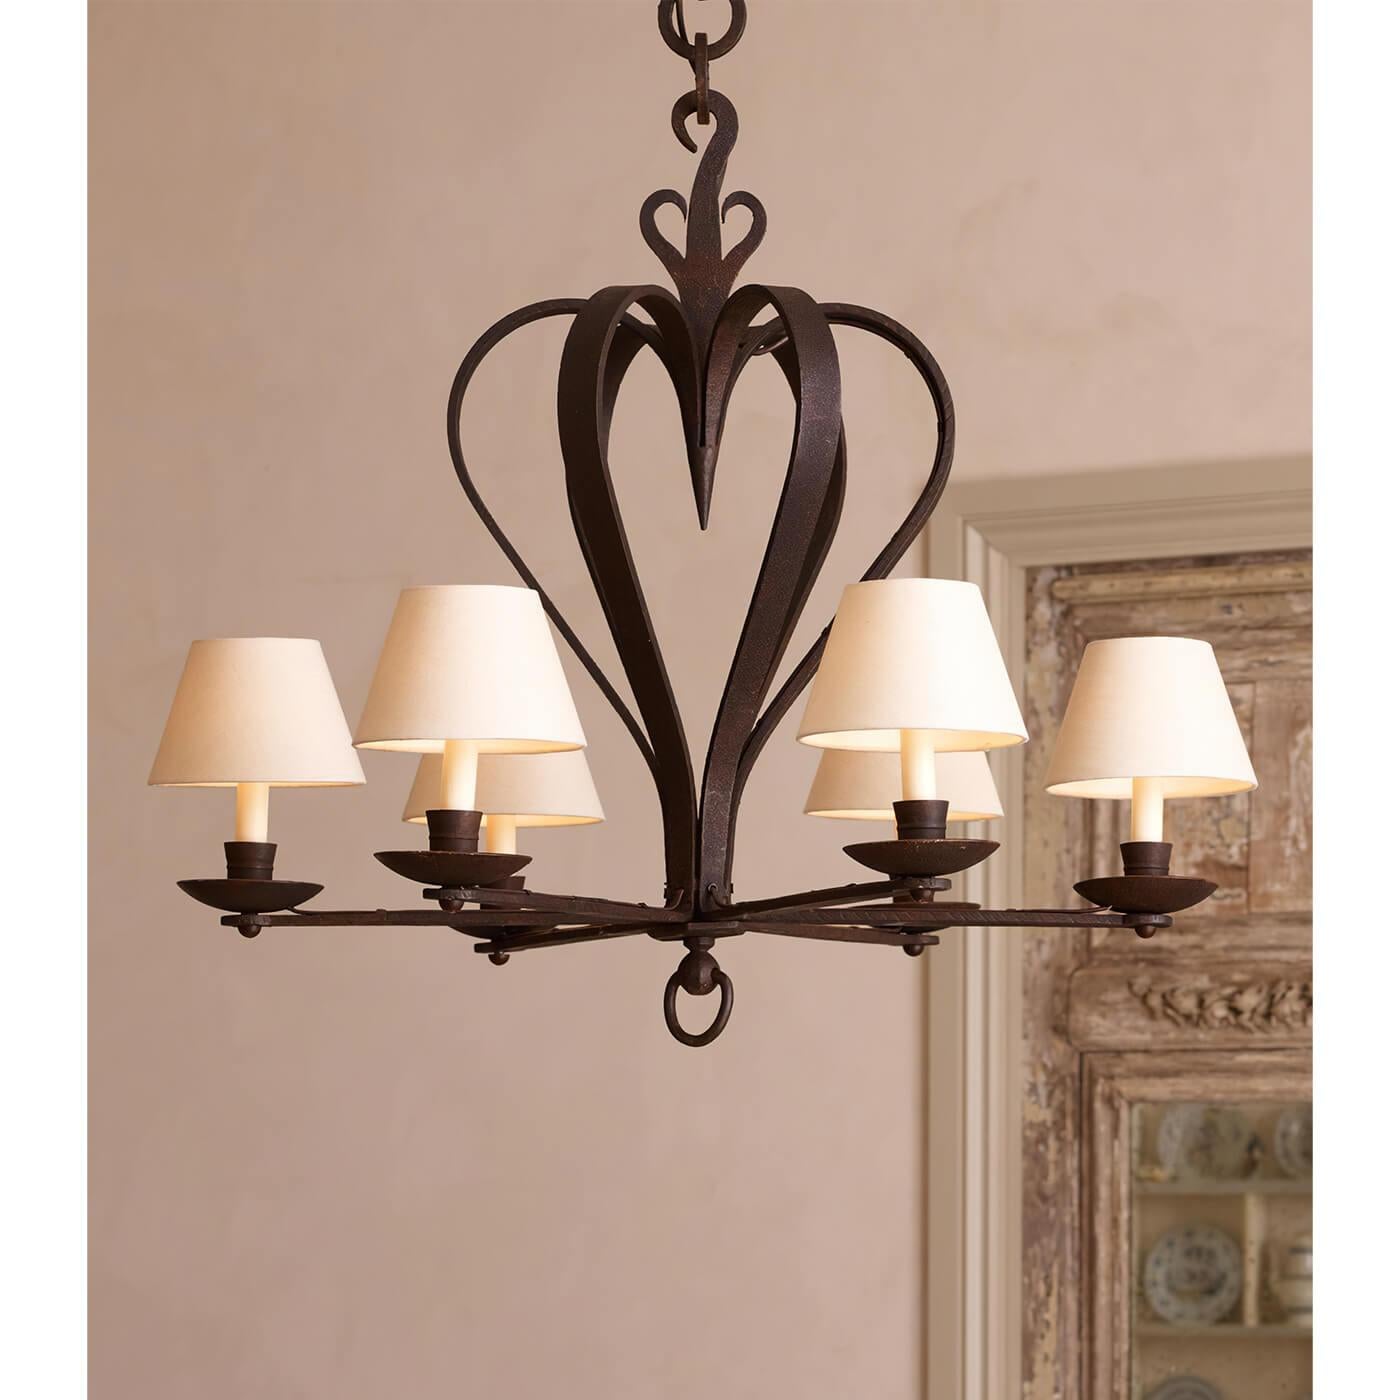 English Rustic French Bastille Chandelier For Sale